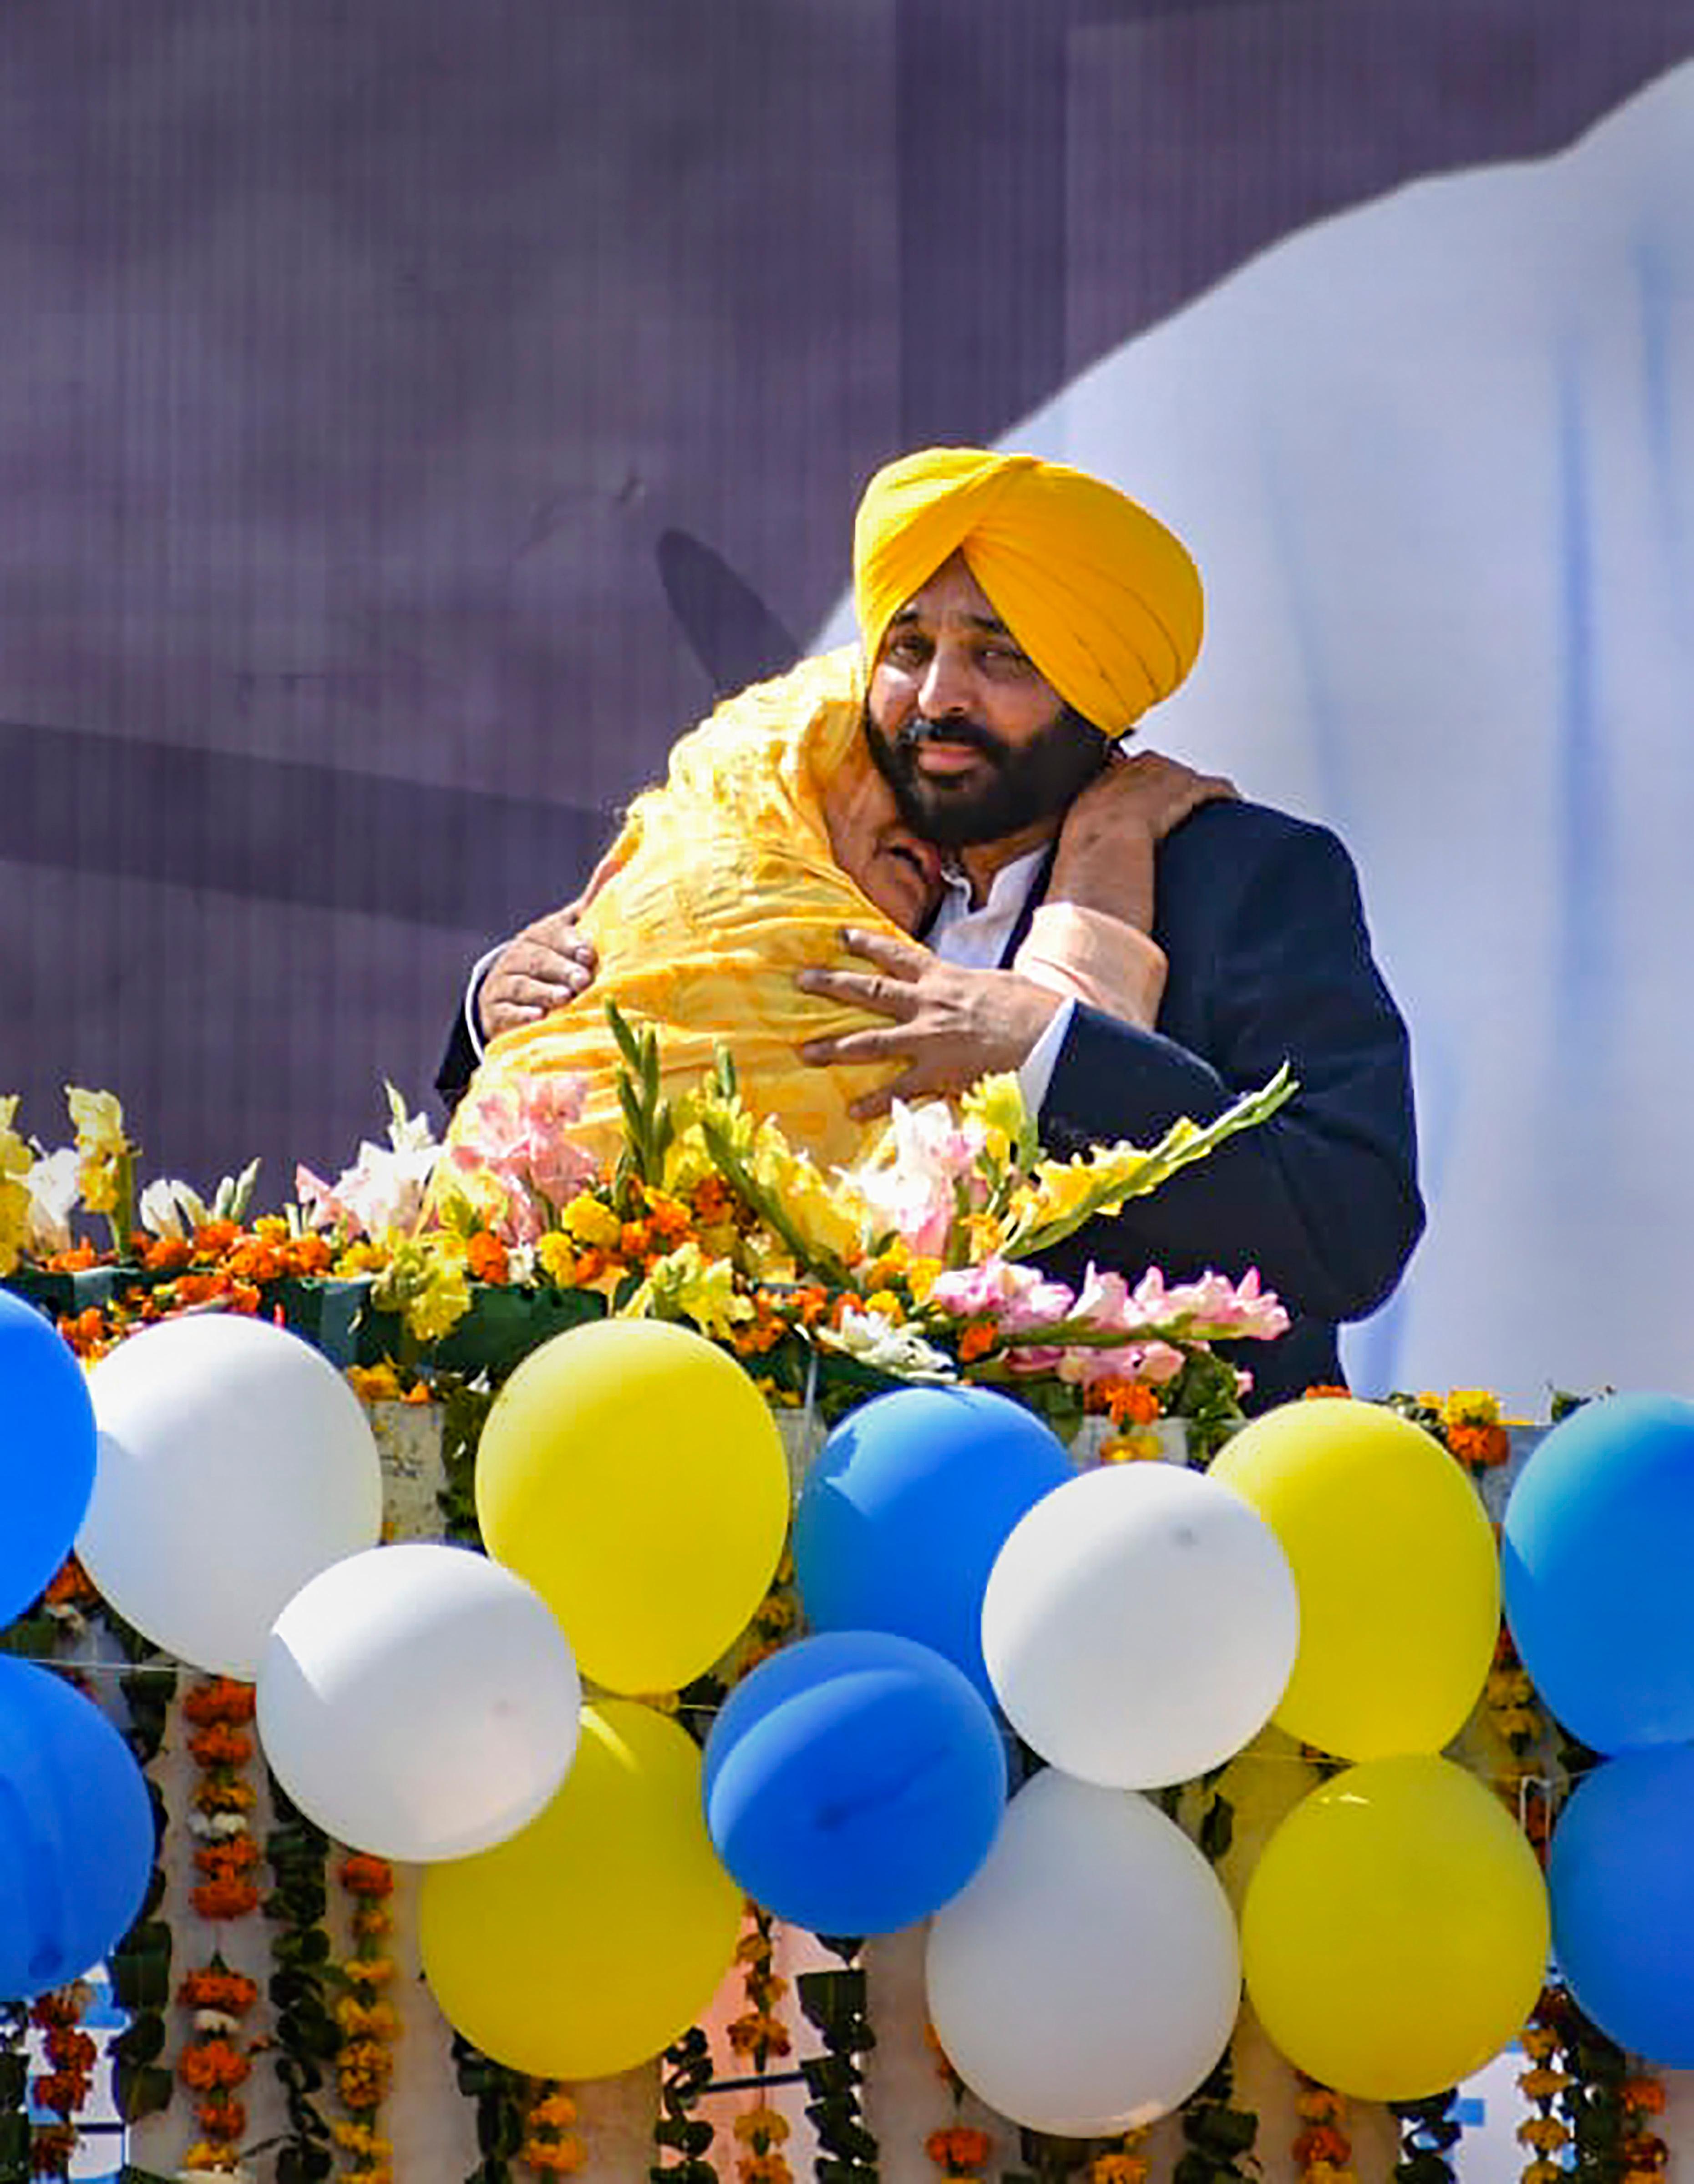 Bhagwant Mann’s mother Harpal Kaur gets emotional in first appearance after result. Mann, a Punjab MP from Sangrur and Aam Aadmi Party's face for the Punjab assembly polls, is set to be the next chief minister with the party poised for a historic verdict in the state.